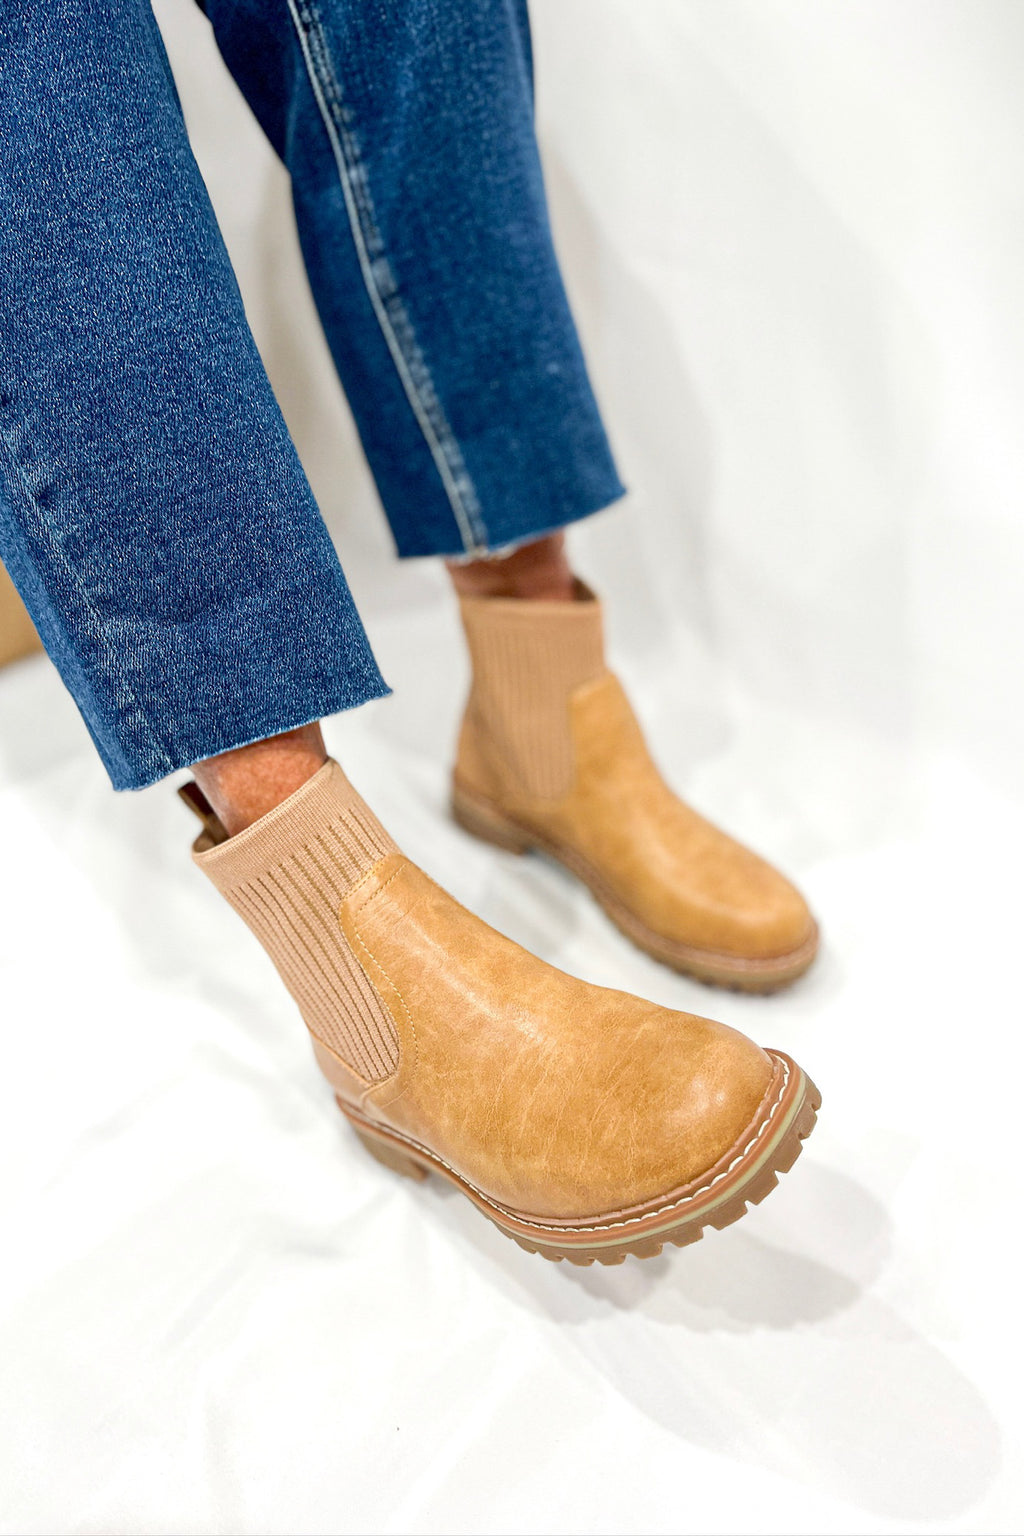 CABIN FEVER CHELSEA BOOTS